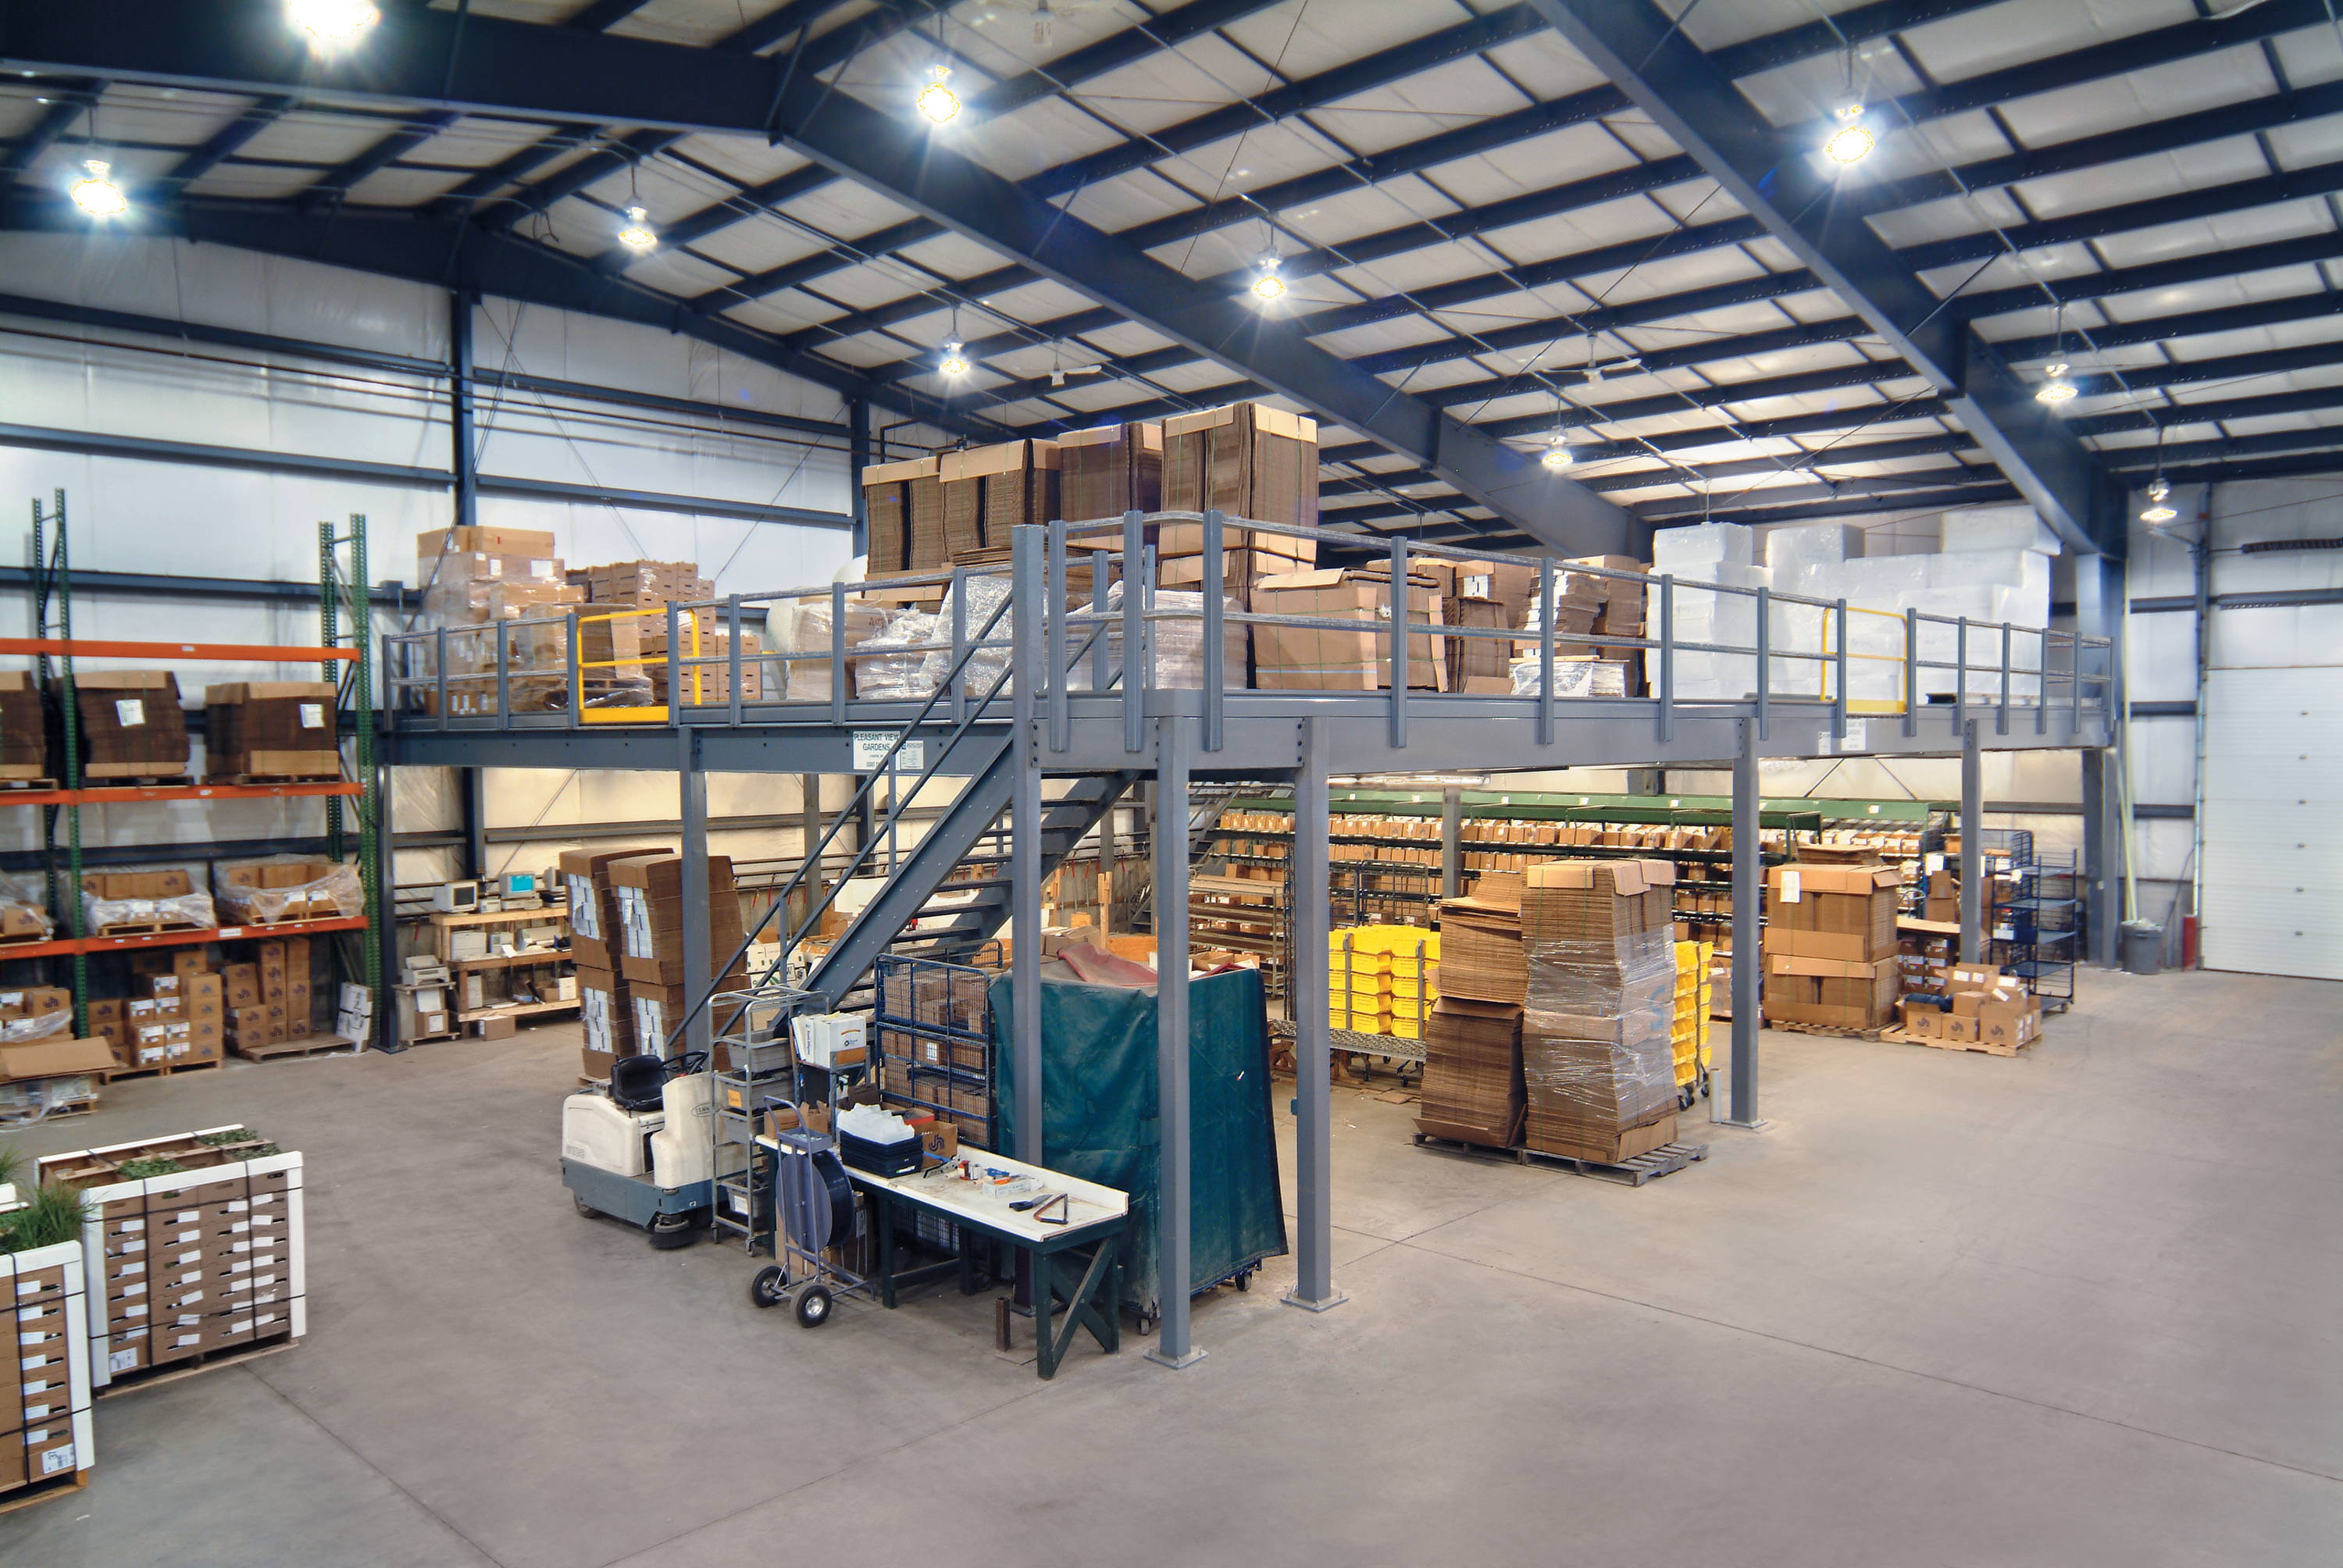 Warehouse mezzanine designed and installed in warehouse.